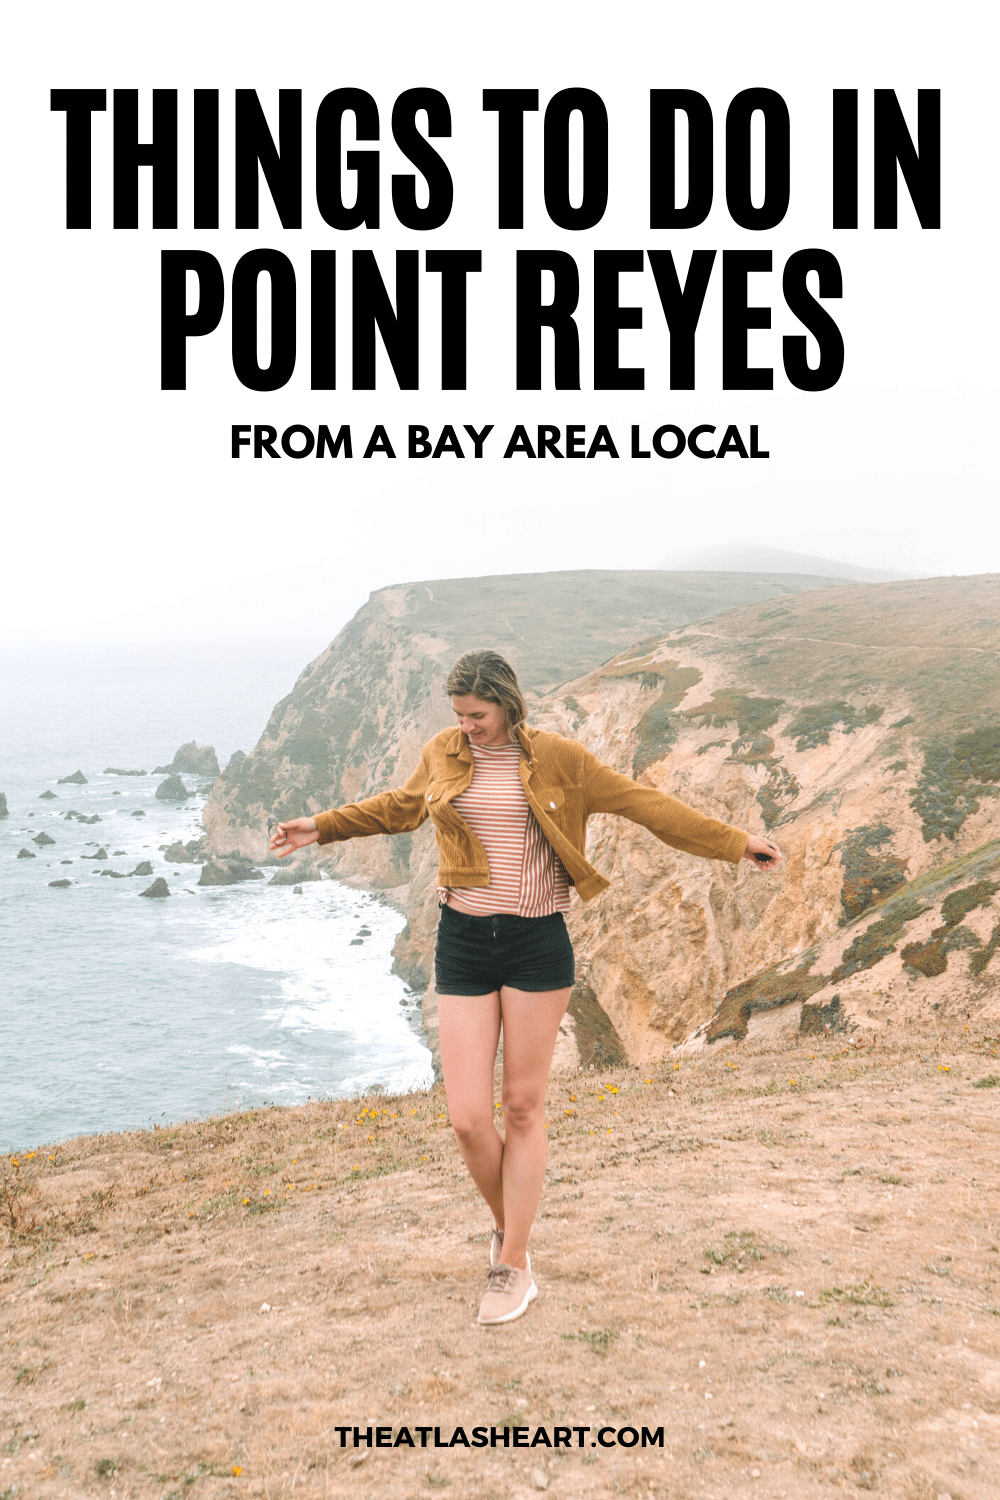 15 Things to do in Point Reyes (From a Bay Area Local)